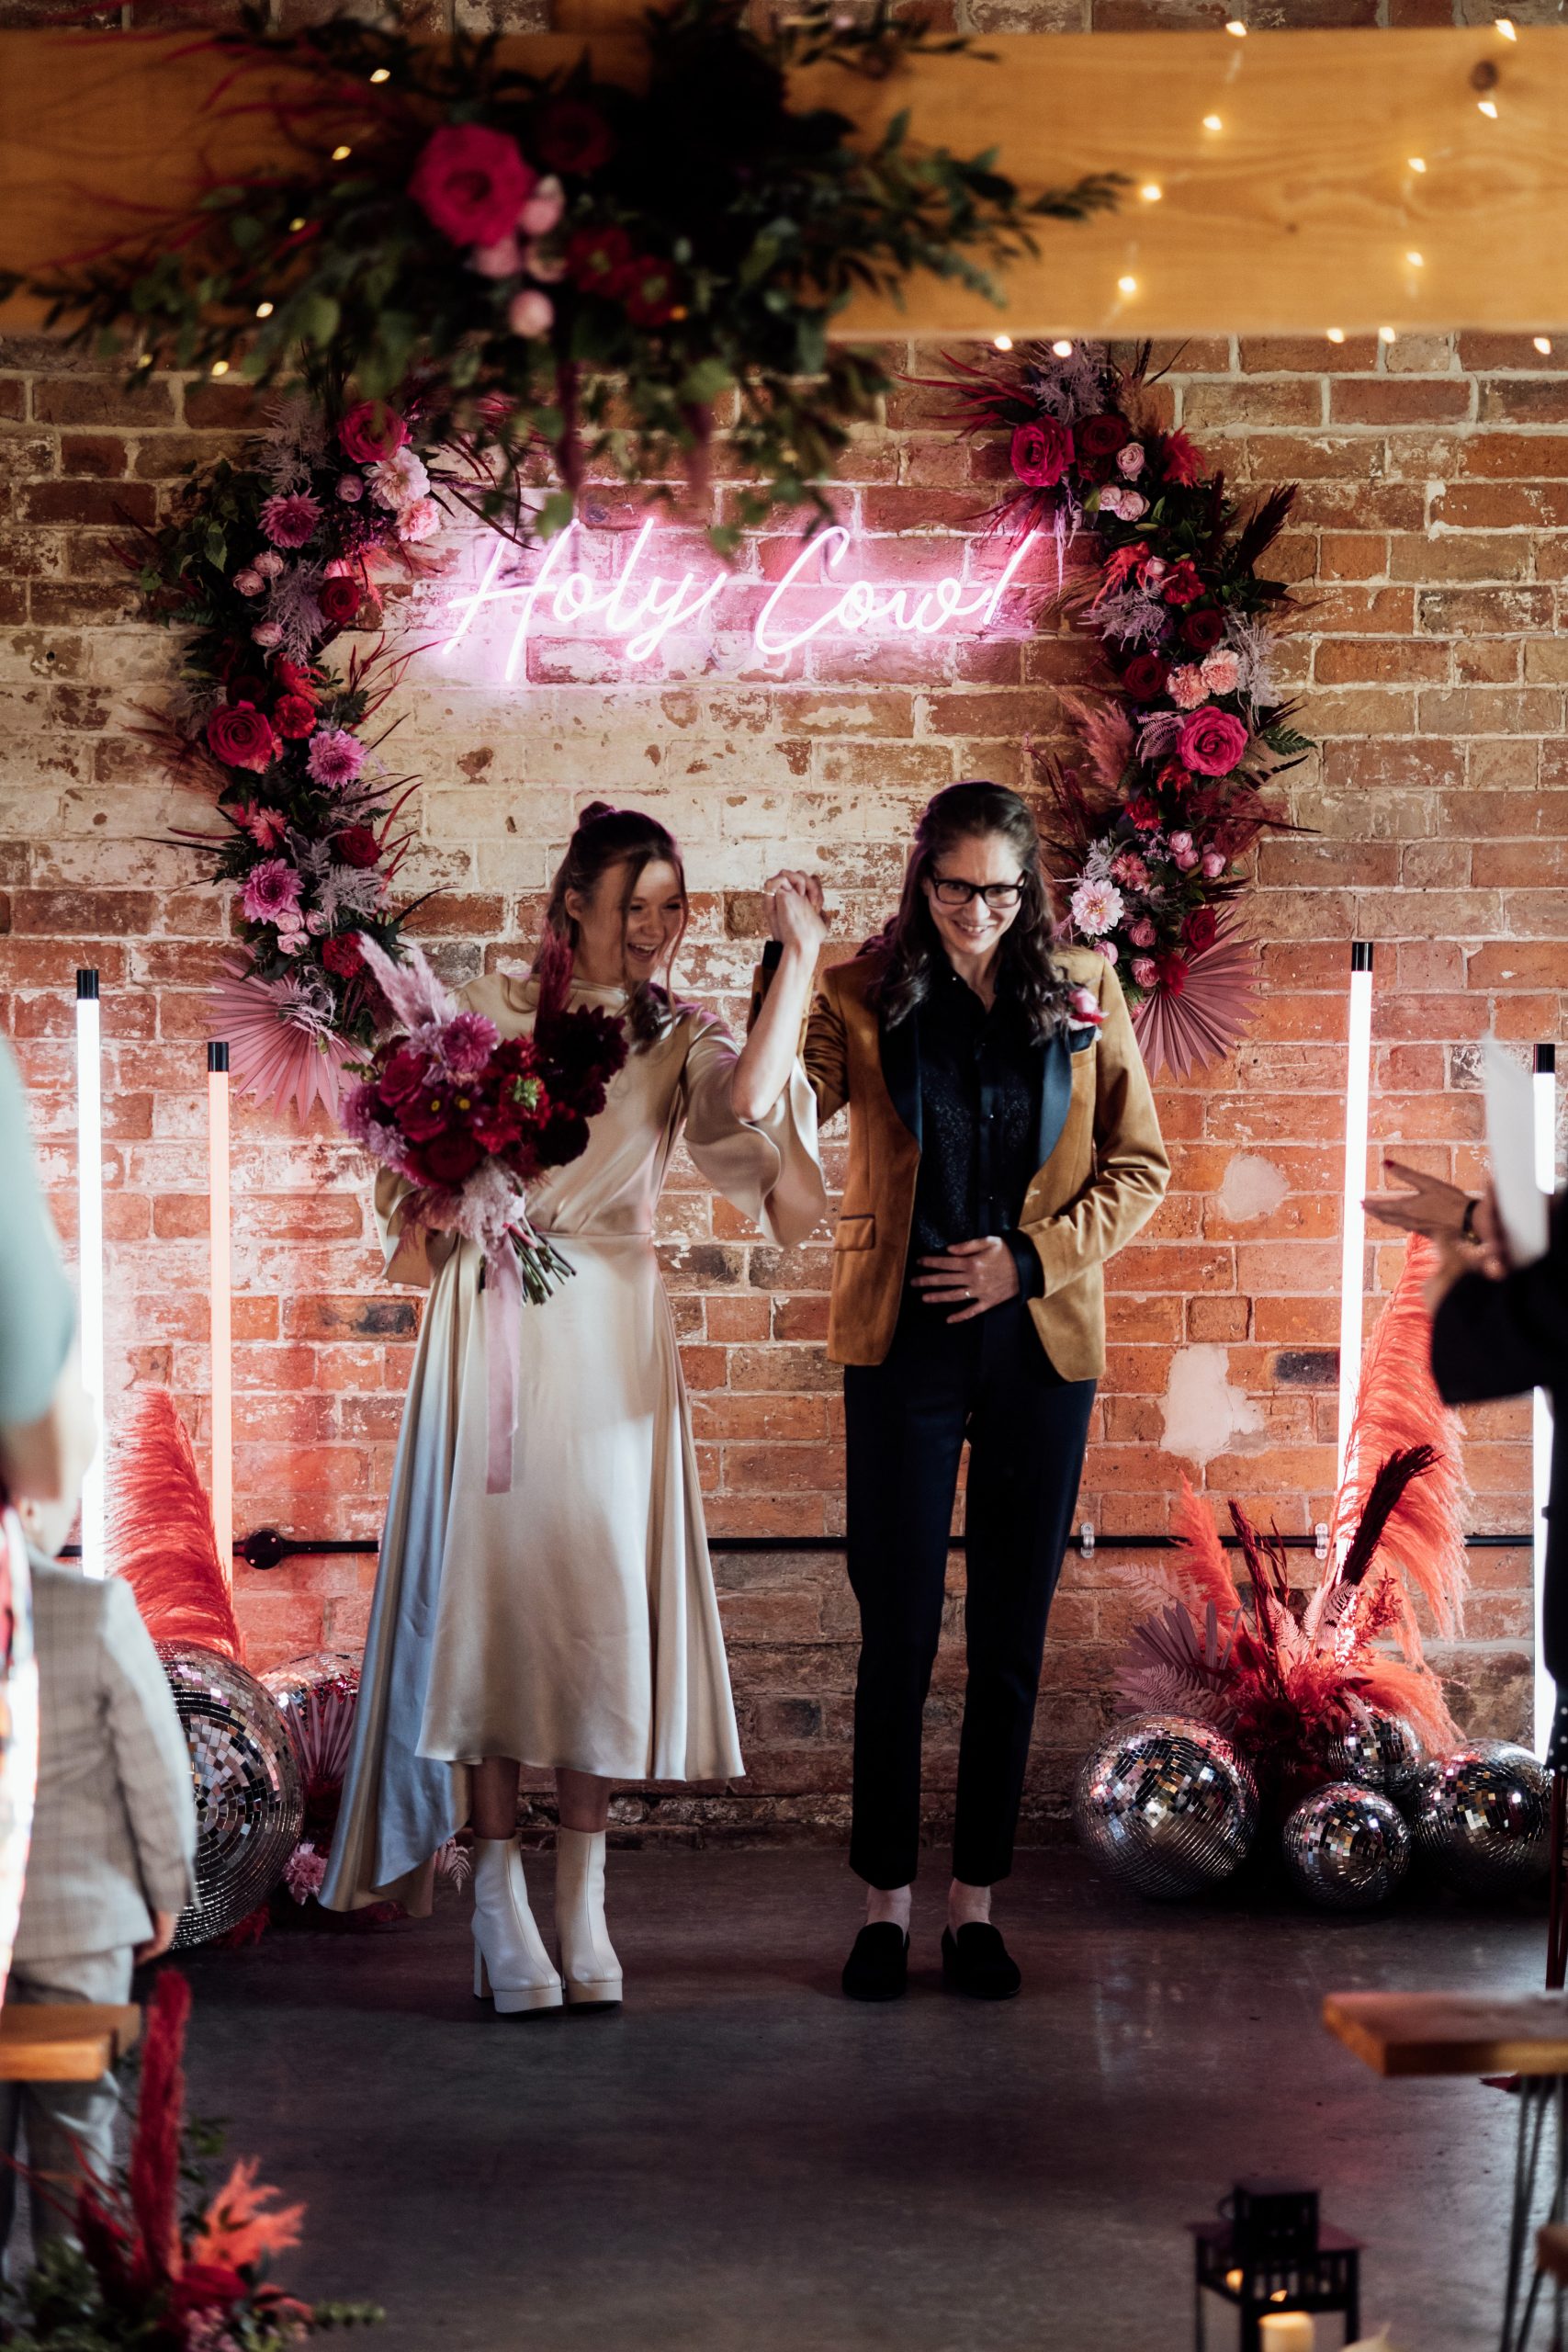 Two brides walking down the aisle with floral backdrop, disco balls and neon stands